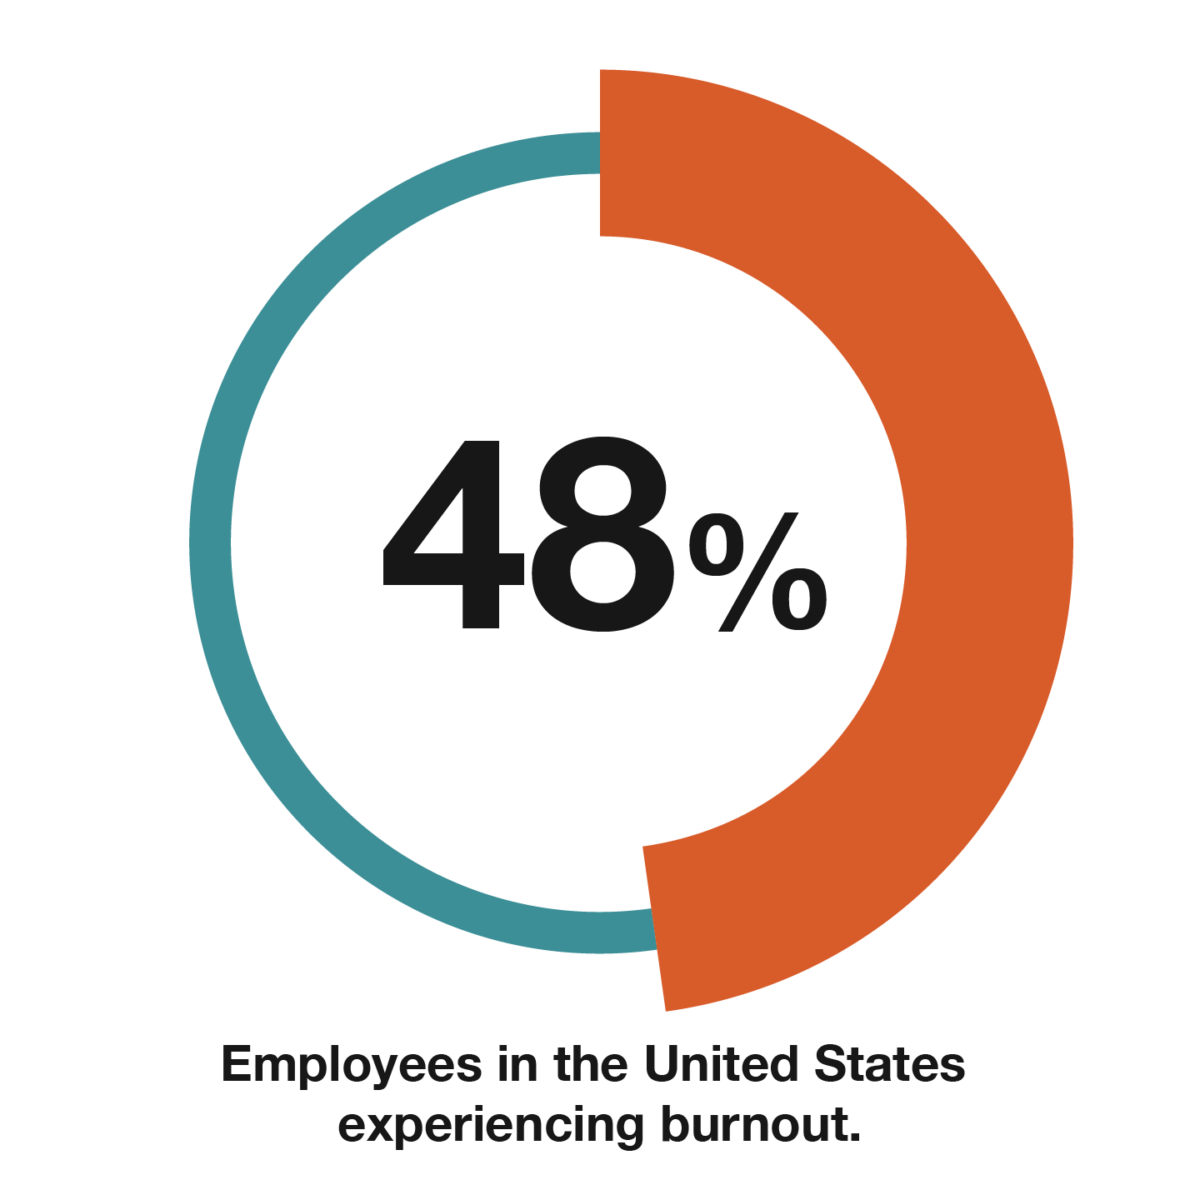 48% of employees in the United States experience burnout.